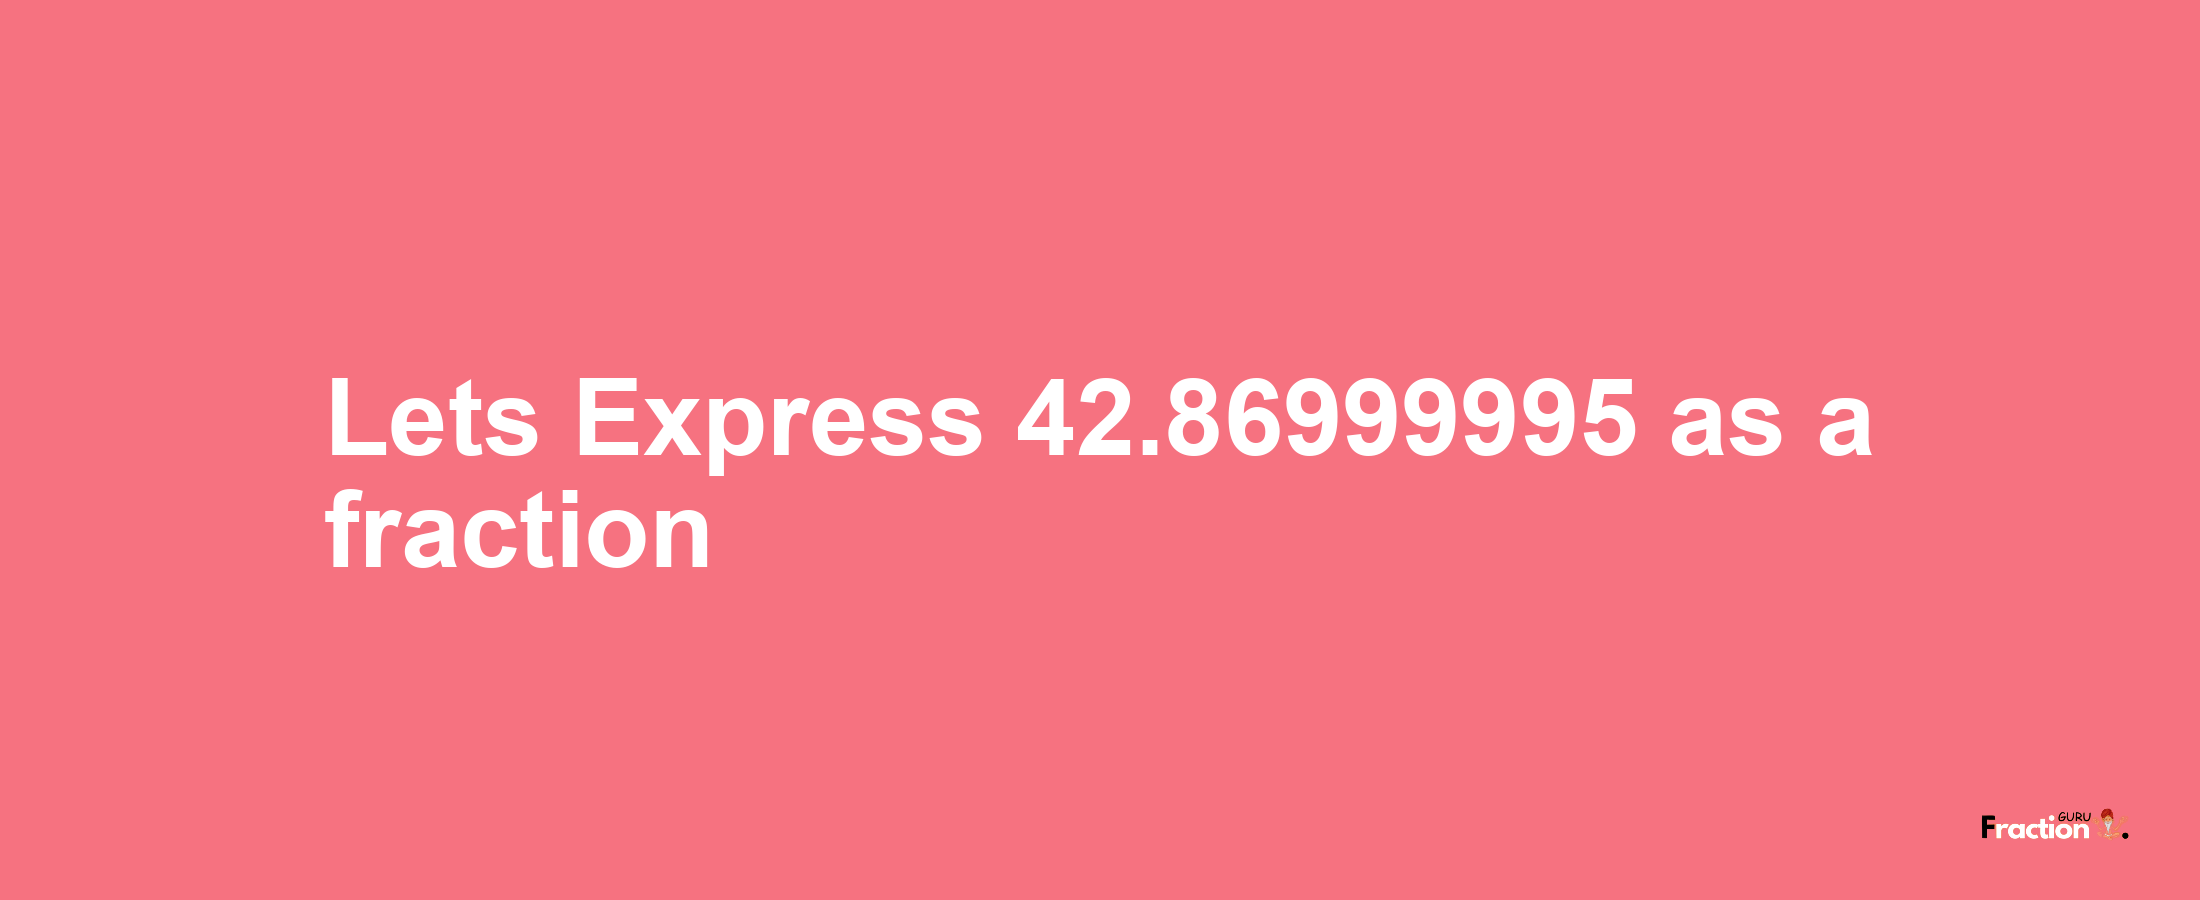 Lets Express 42.86999995 as afraction